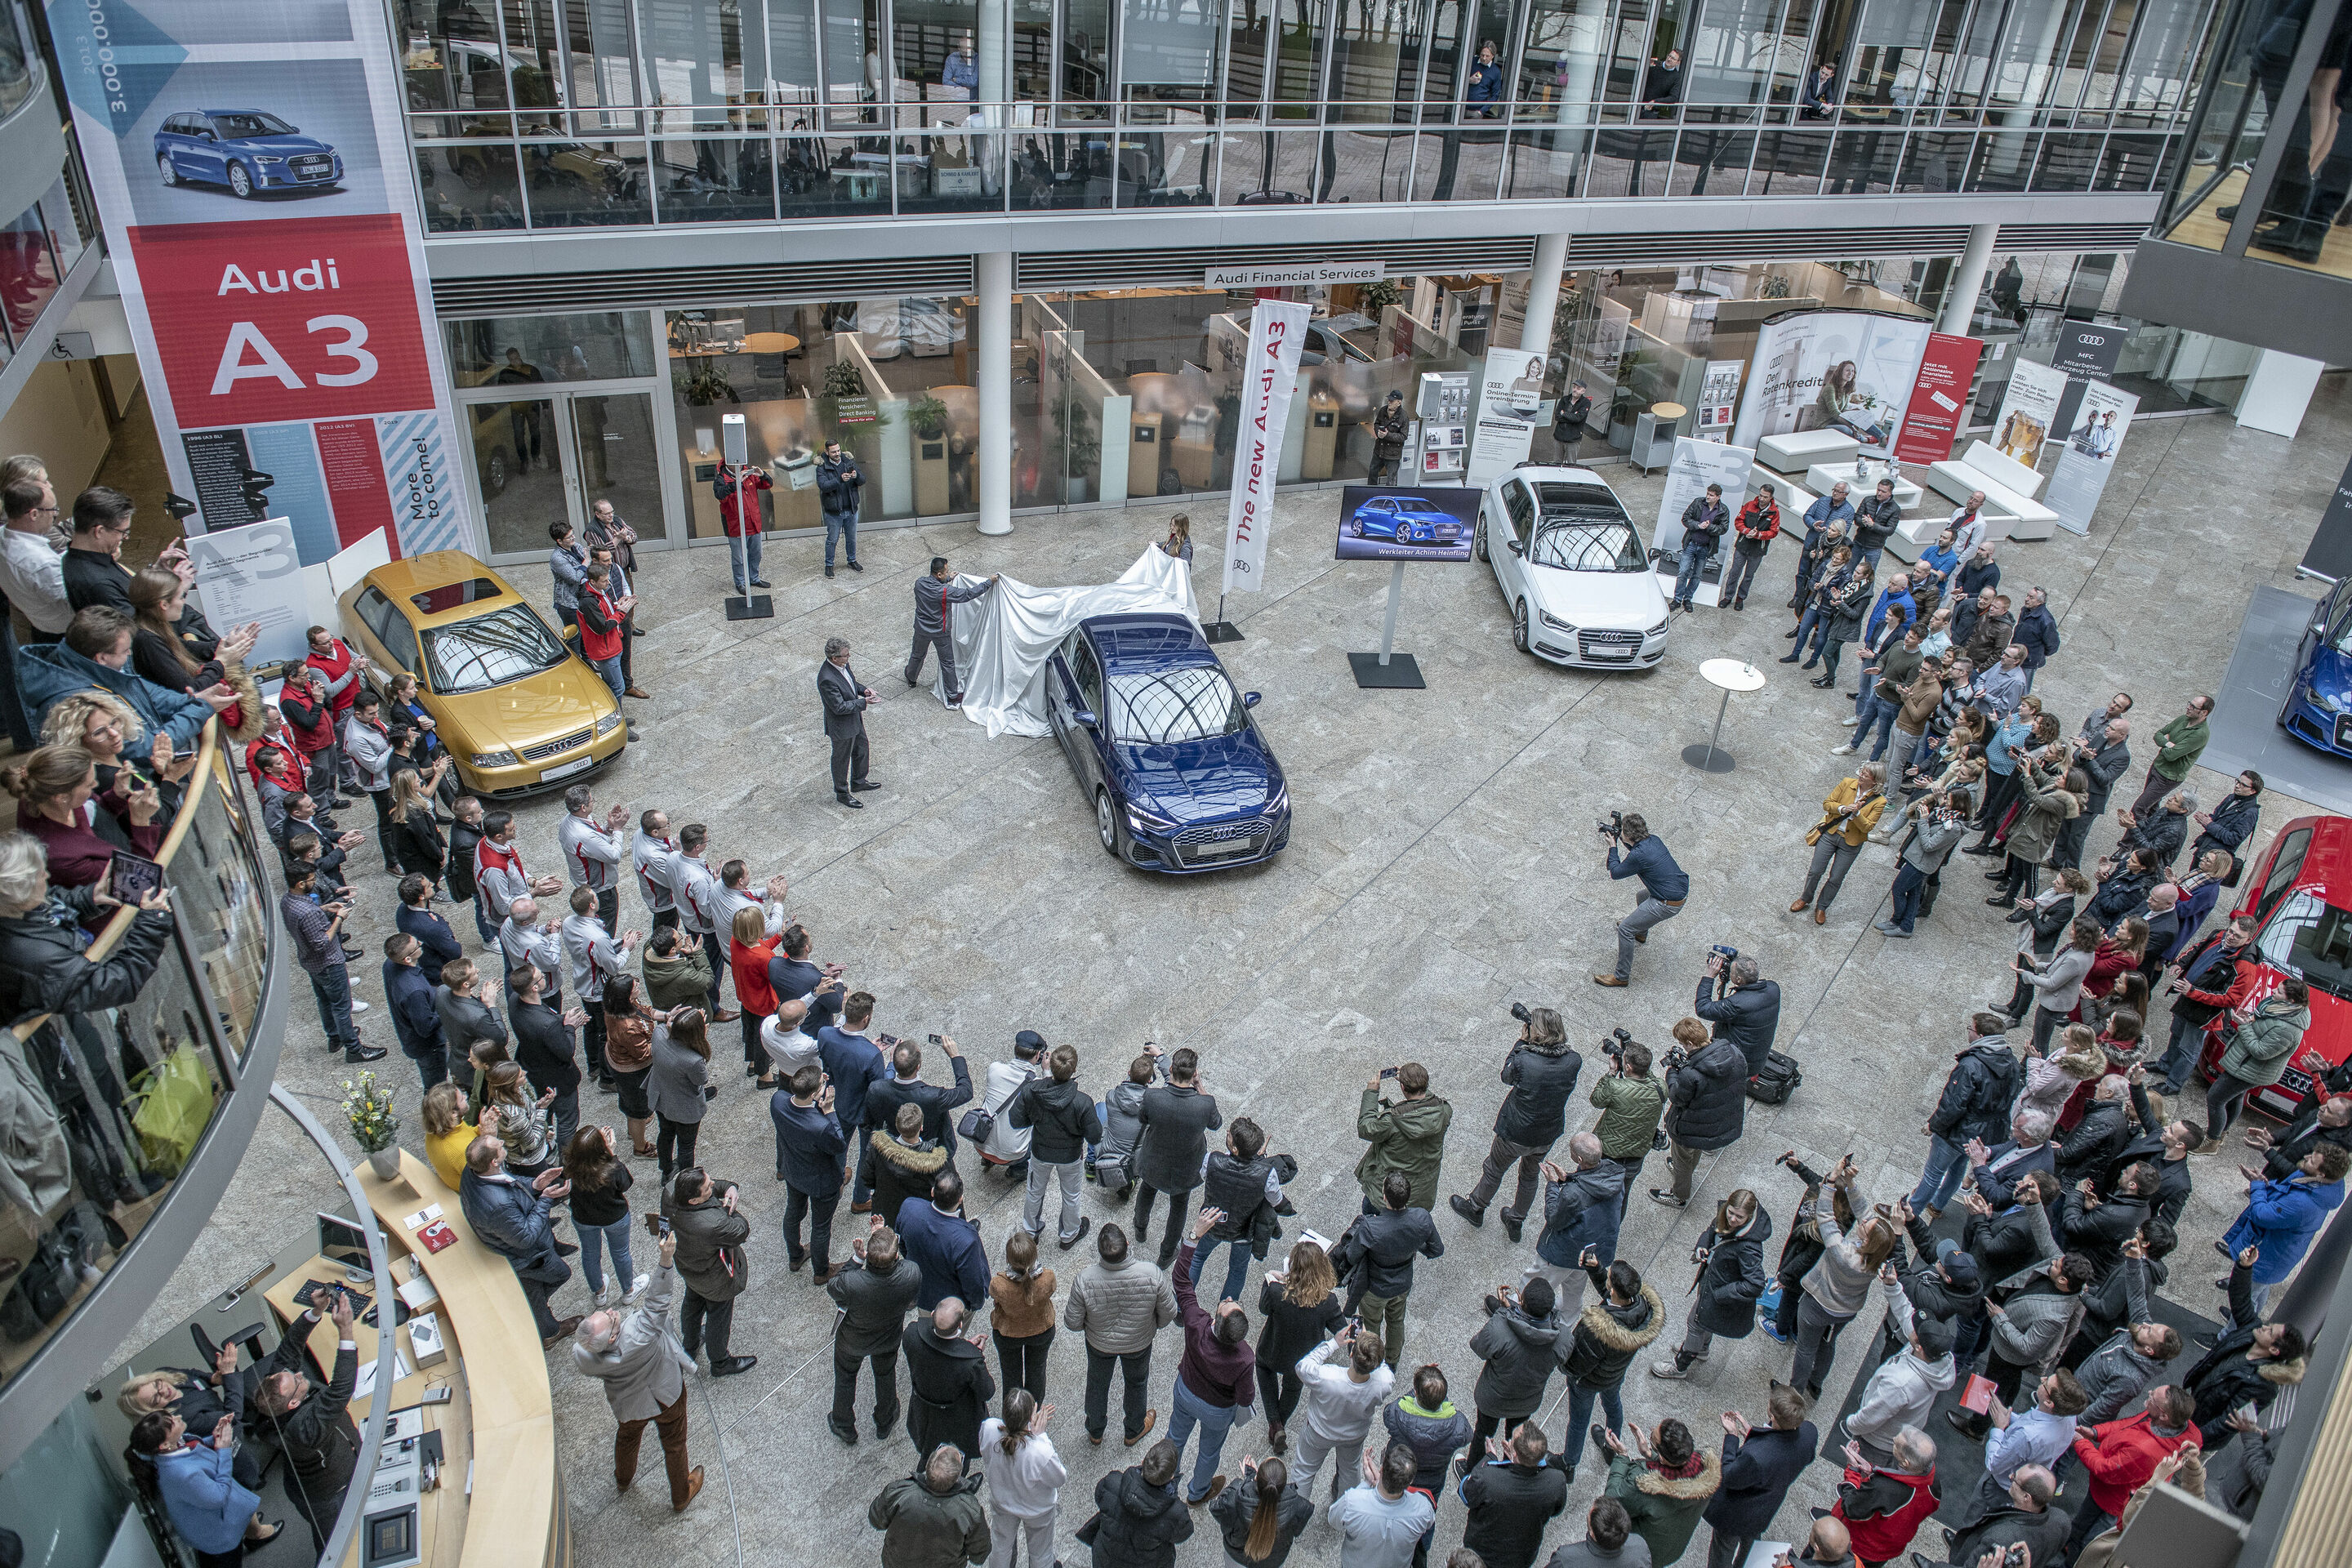 Generational change: Start of production of the new Audi A3 Sportback in Ingolstadt.